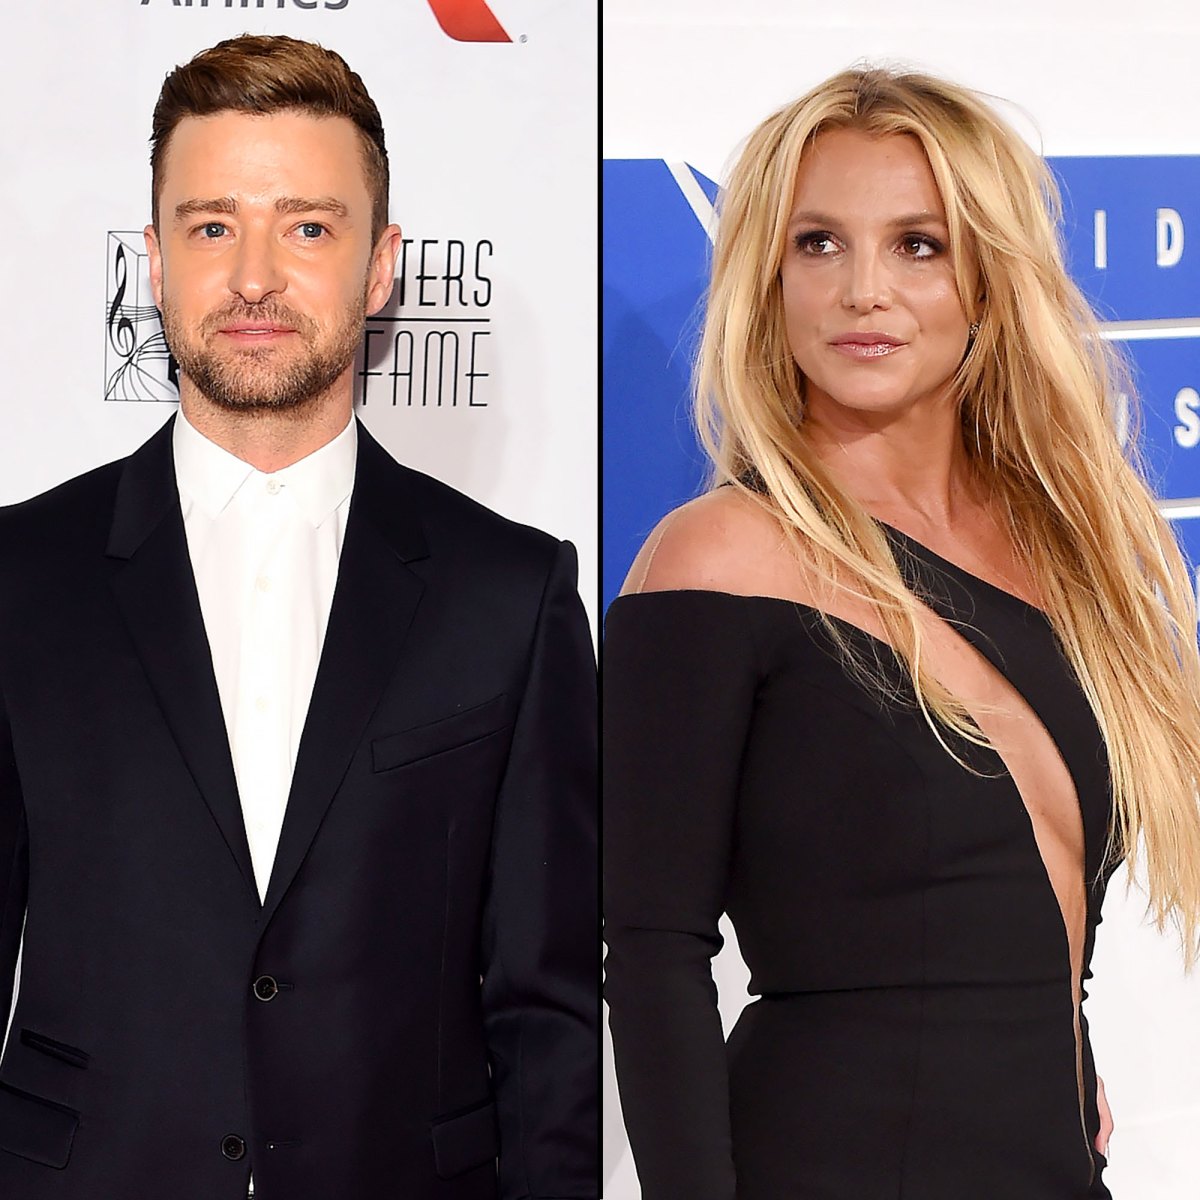 What did Justin Timberlake do to Britney Spears?